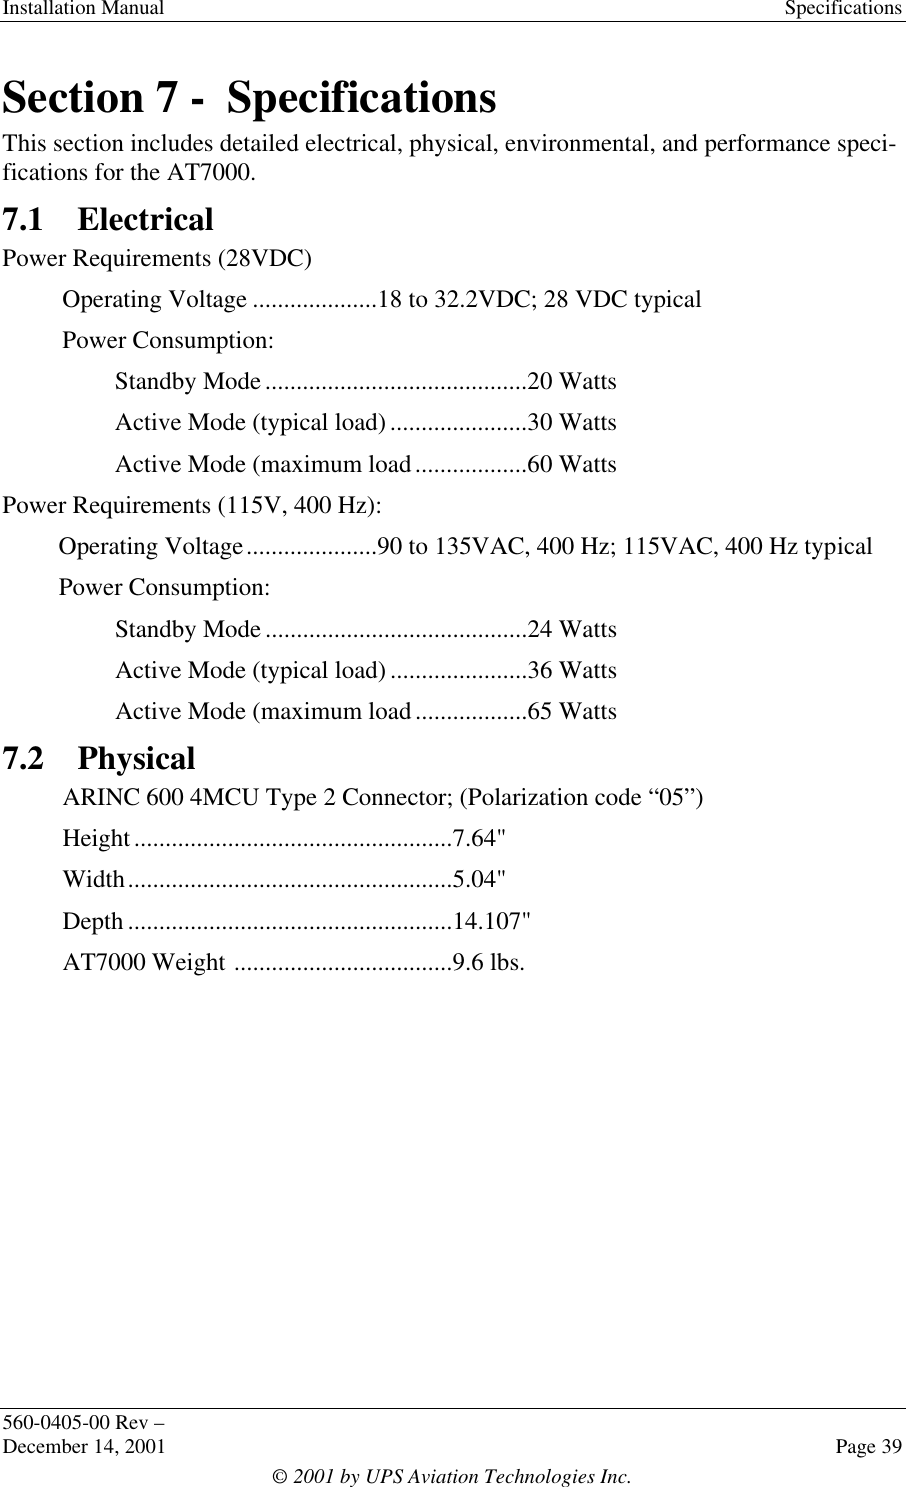 Installation Manual Specifications560-0405-00 Rev –December 14, 2001 Page 39© 2001 by UPS Aviation Technologies Inc.Section 7 -  SpecificationsThis section includes detailed electrical, physical, environmental, and performance speci-fications for the AT7000.7.1 ElectricalPower Requirements (28VDC)Operating Voltage ....................18 to 32.2VDC; 28 VDC typicalPower Consumption:Standby Mode..........................................20 WattsActive Mode (typical load)......................30 WattsActive Mode (maximum load..................60 WattsPower Requirements (115V, 400 Hz):Operating Voltage.....................90 to 135VAC, 400 Hz; 115VAC, 400 Hz typicalPower Consumption:Standby Mode..........................................24 WattsActive Mode (typical load)......................36 WattsActive Mode (maximum load..................65 Watts7.2 PhysicalARINC 600 4MCU Type 2 Connector; (Polarization code “05”)Height...................................................7.64&quot;Width....................................................5.04&quot;Depth ....................................................14.107&quot;AT7000 Weight ...................................9.6 lbs.